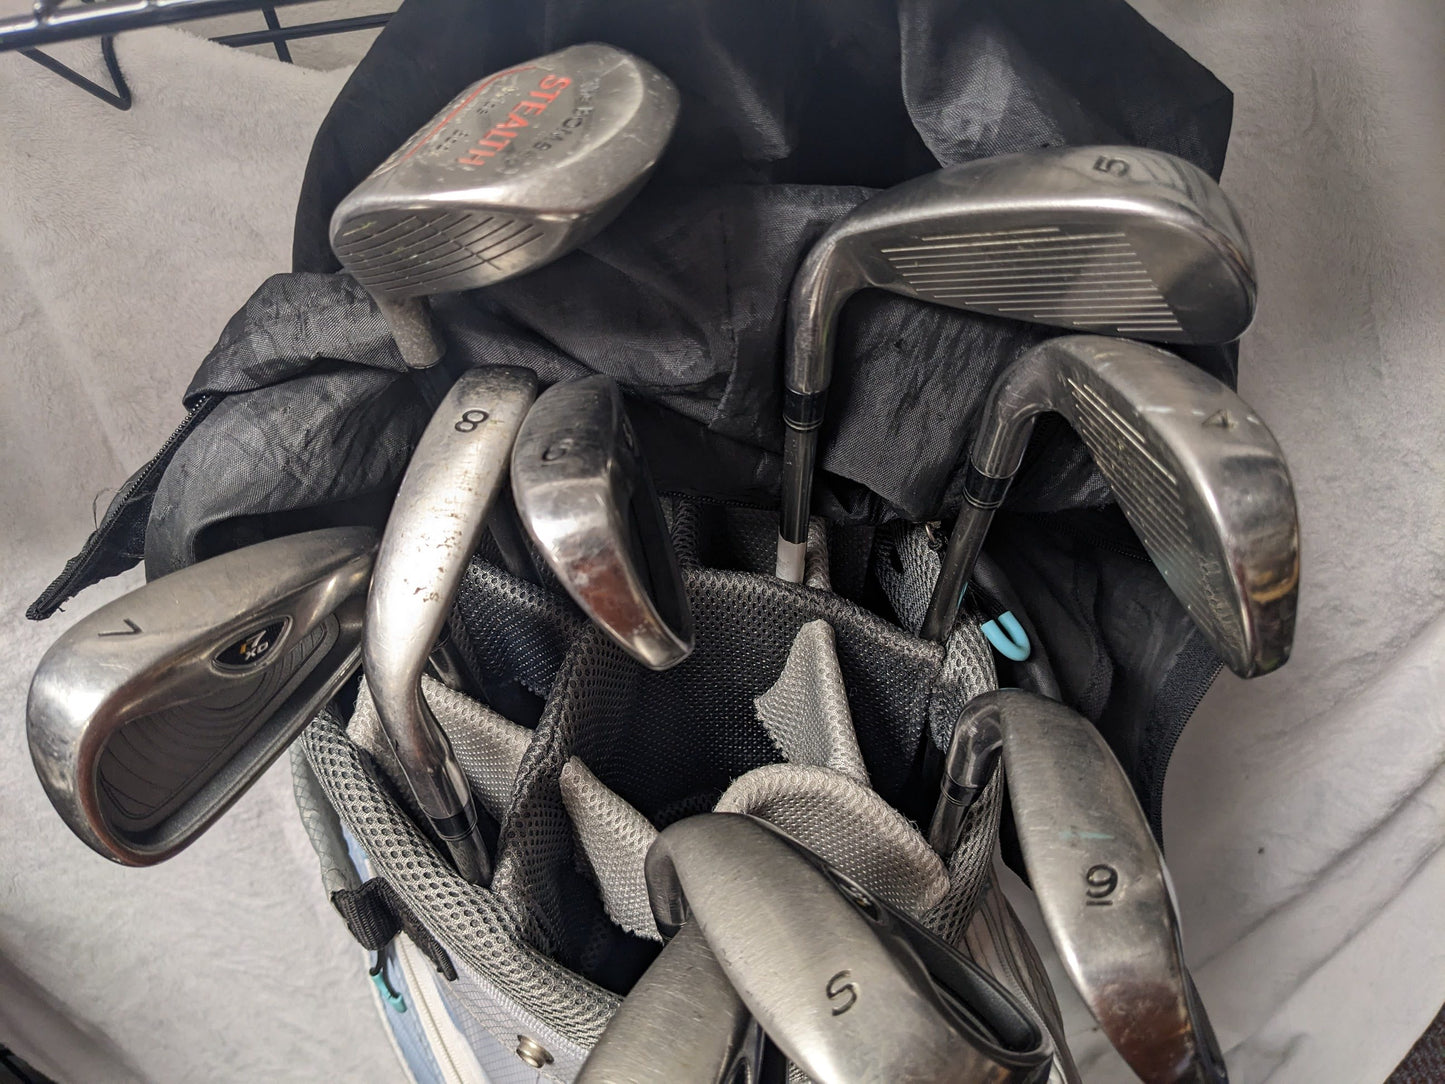 Top Flight Flawless Golf Bag with Taylor Made i7xd Irons and Stealth Drivers Right Hand Golf Set Size Bag + 10 Clubs (No Putter) Color Blue Condition Used